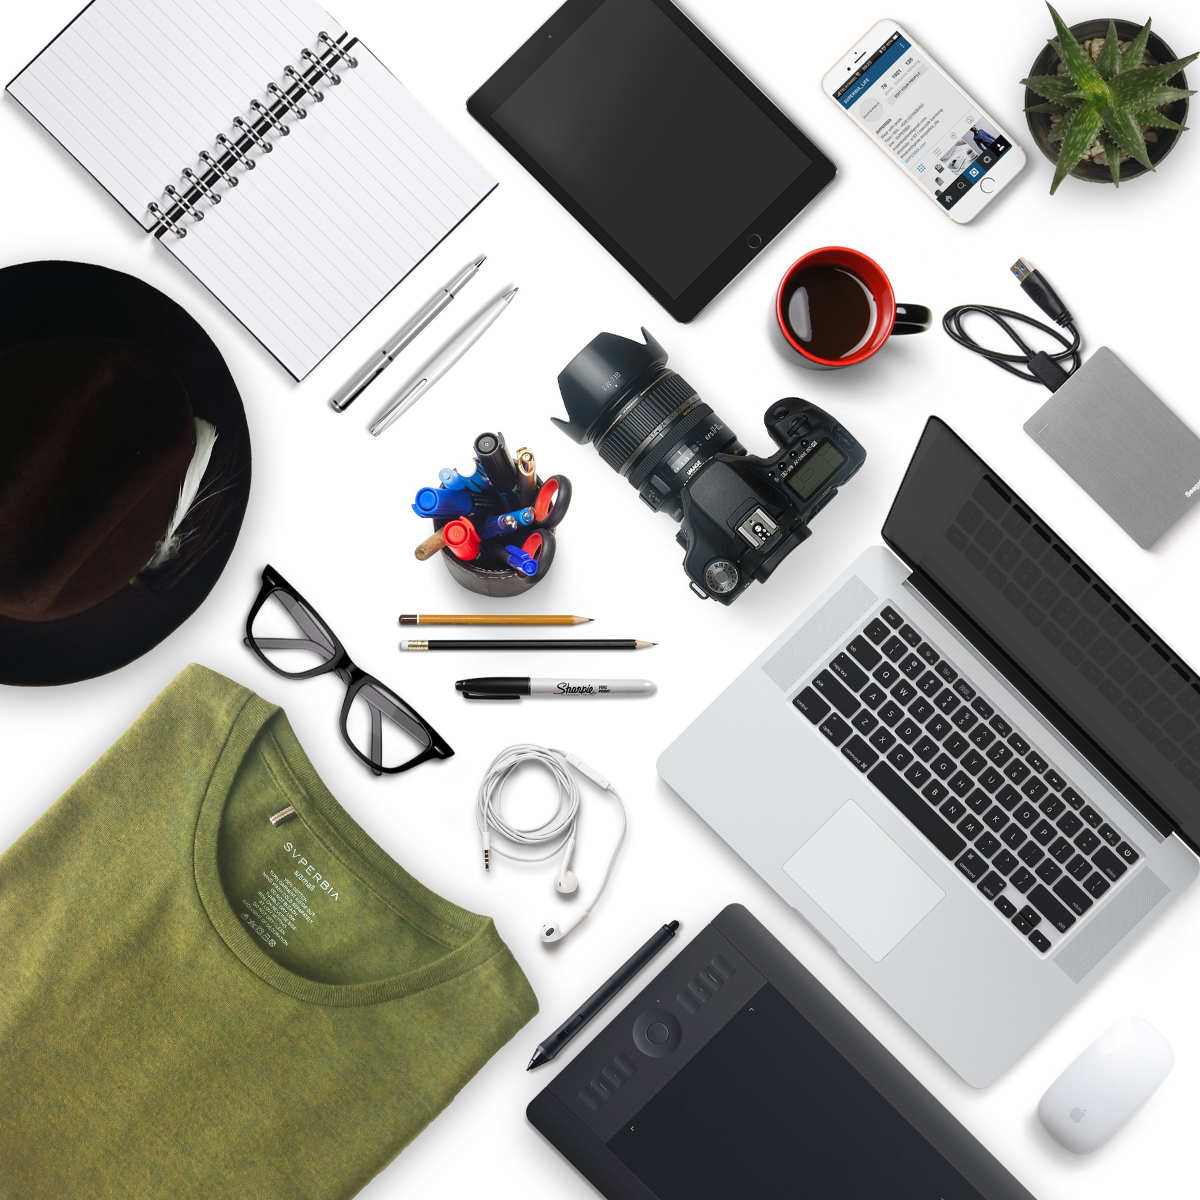 A notebook, a tablet, a phone, a camera, a laptop computer and many other items.